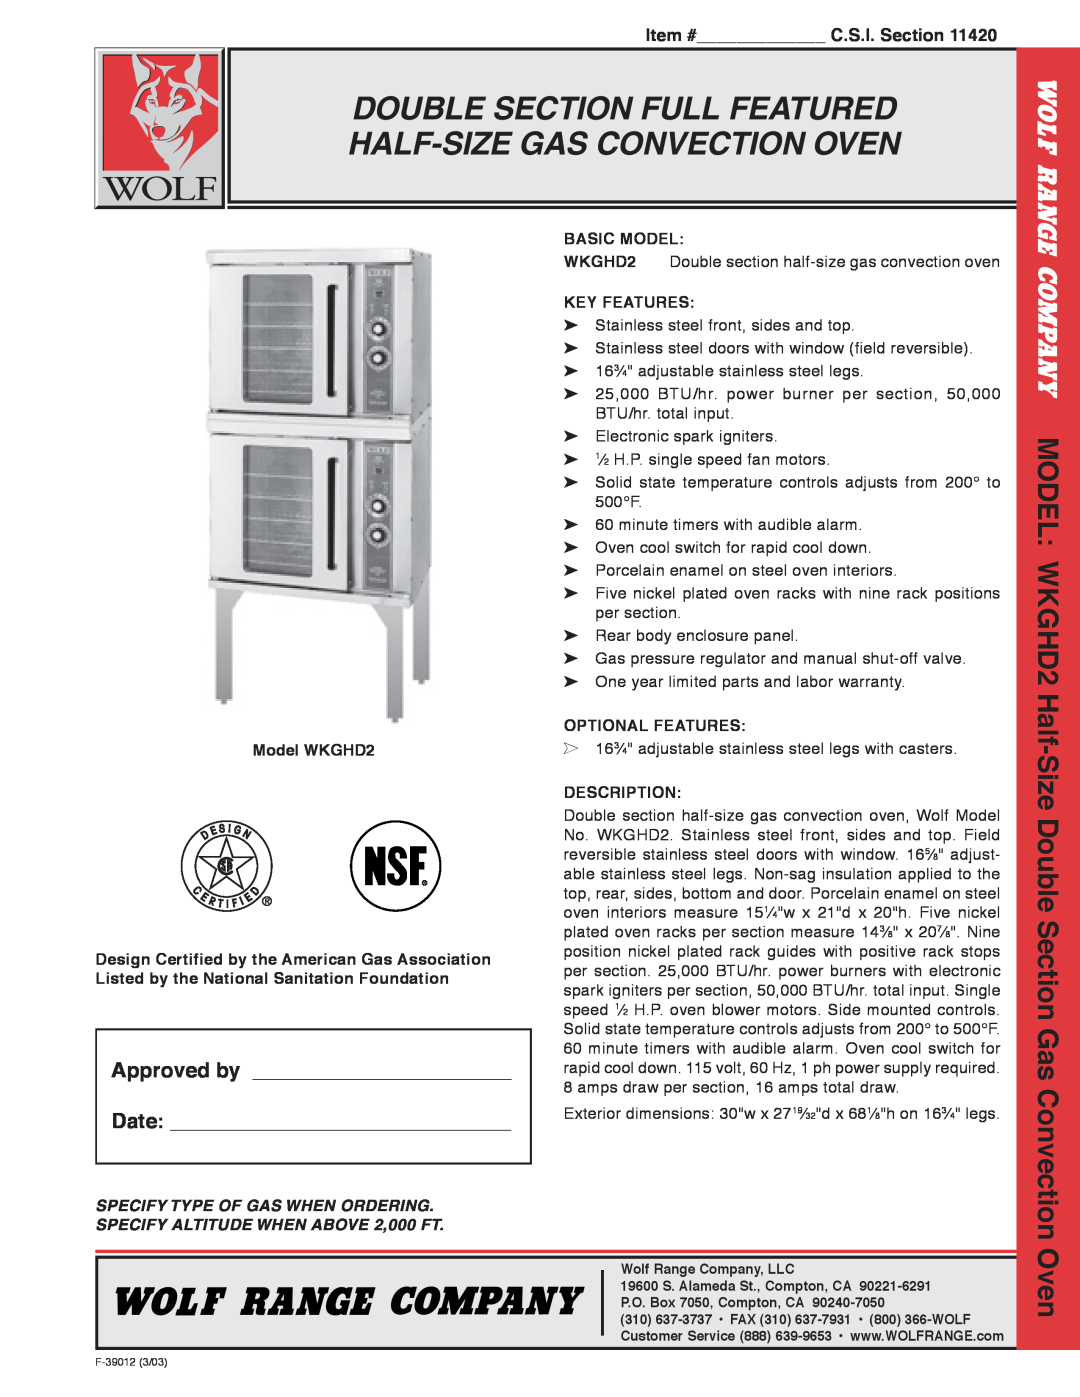 Wolf WKGHD2 warranty Item # C.S.I. Section, Double Section Full Featured Half-Size Gas Convection Oven, Approved by Date 